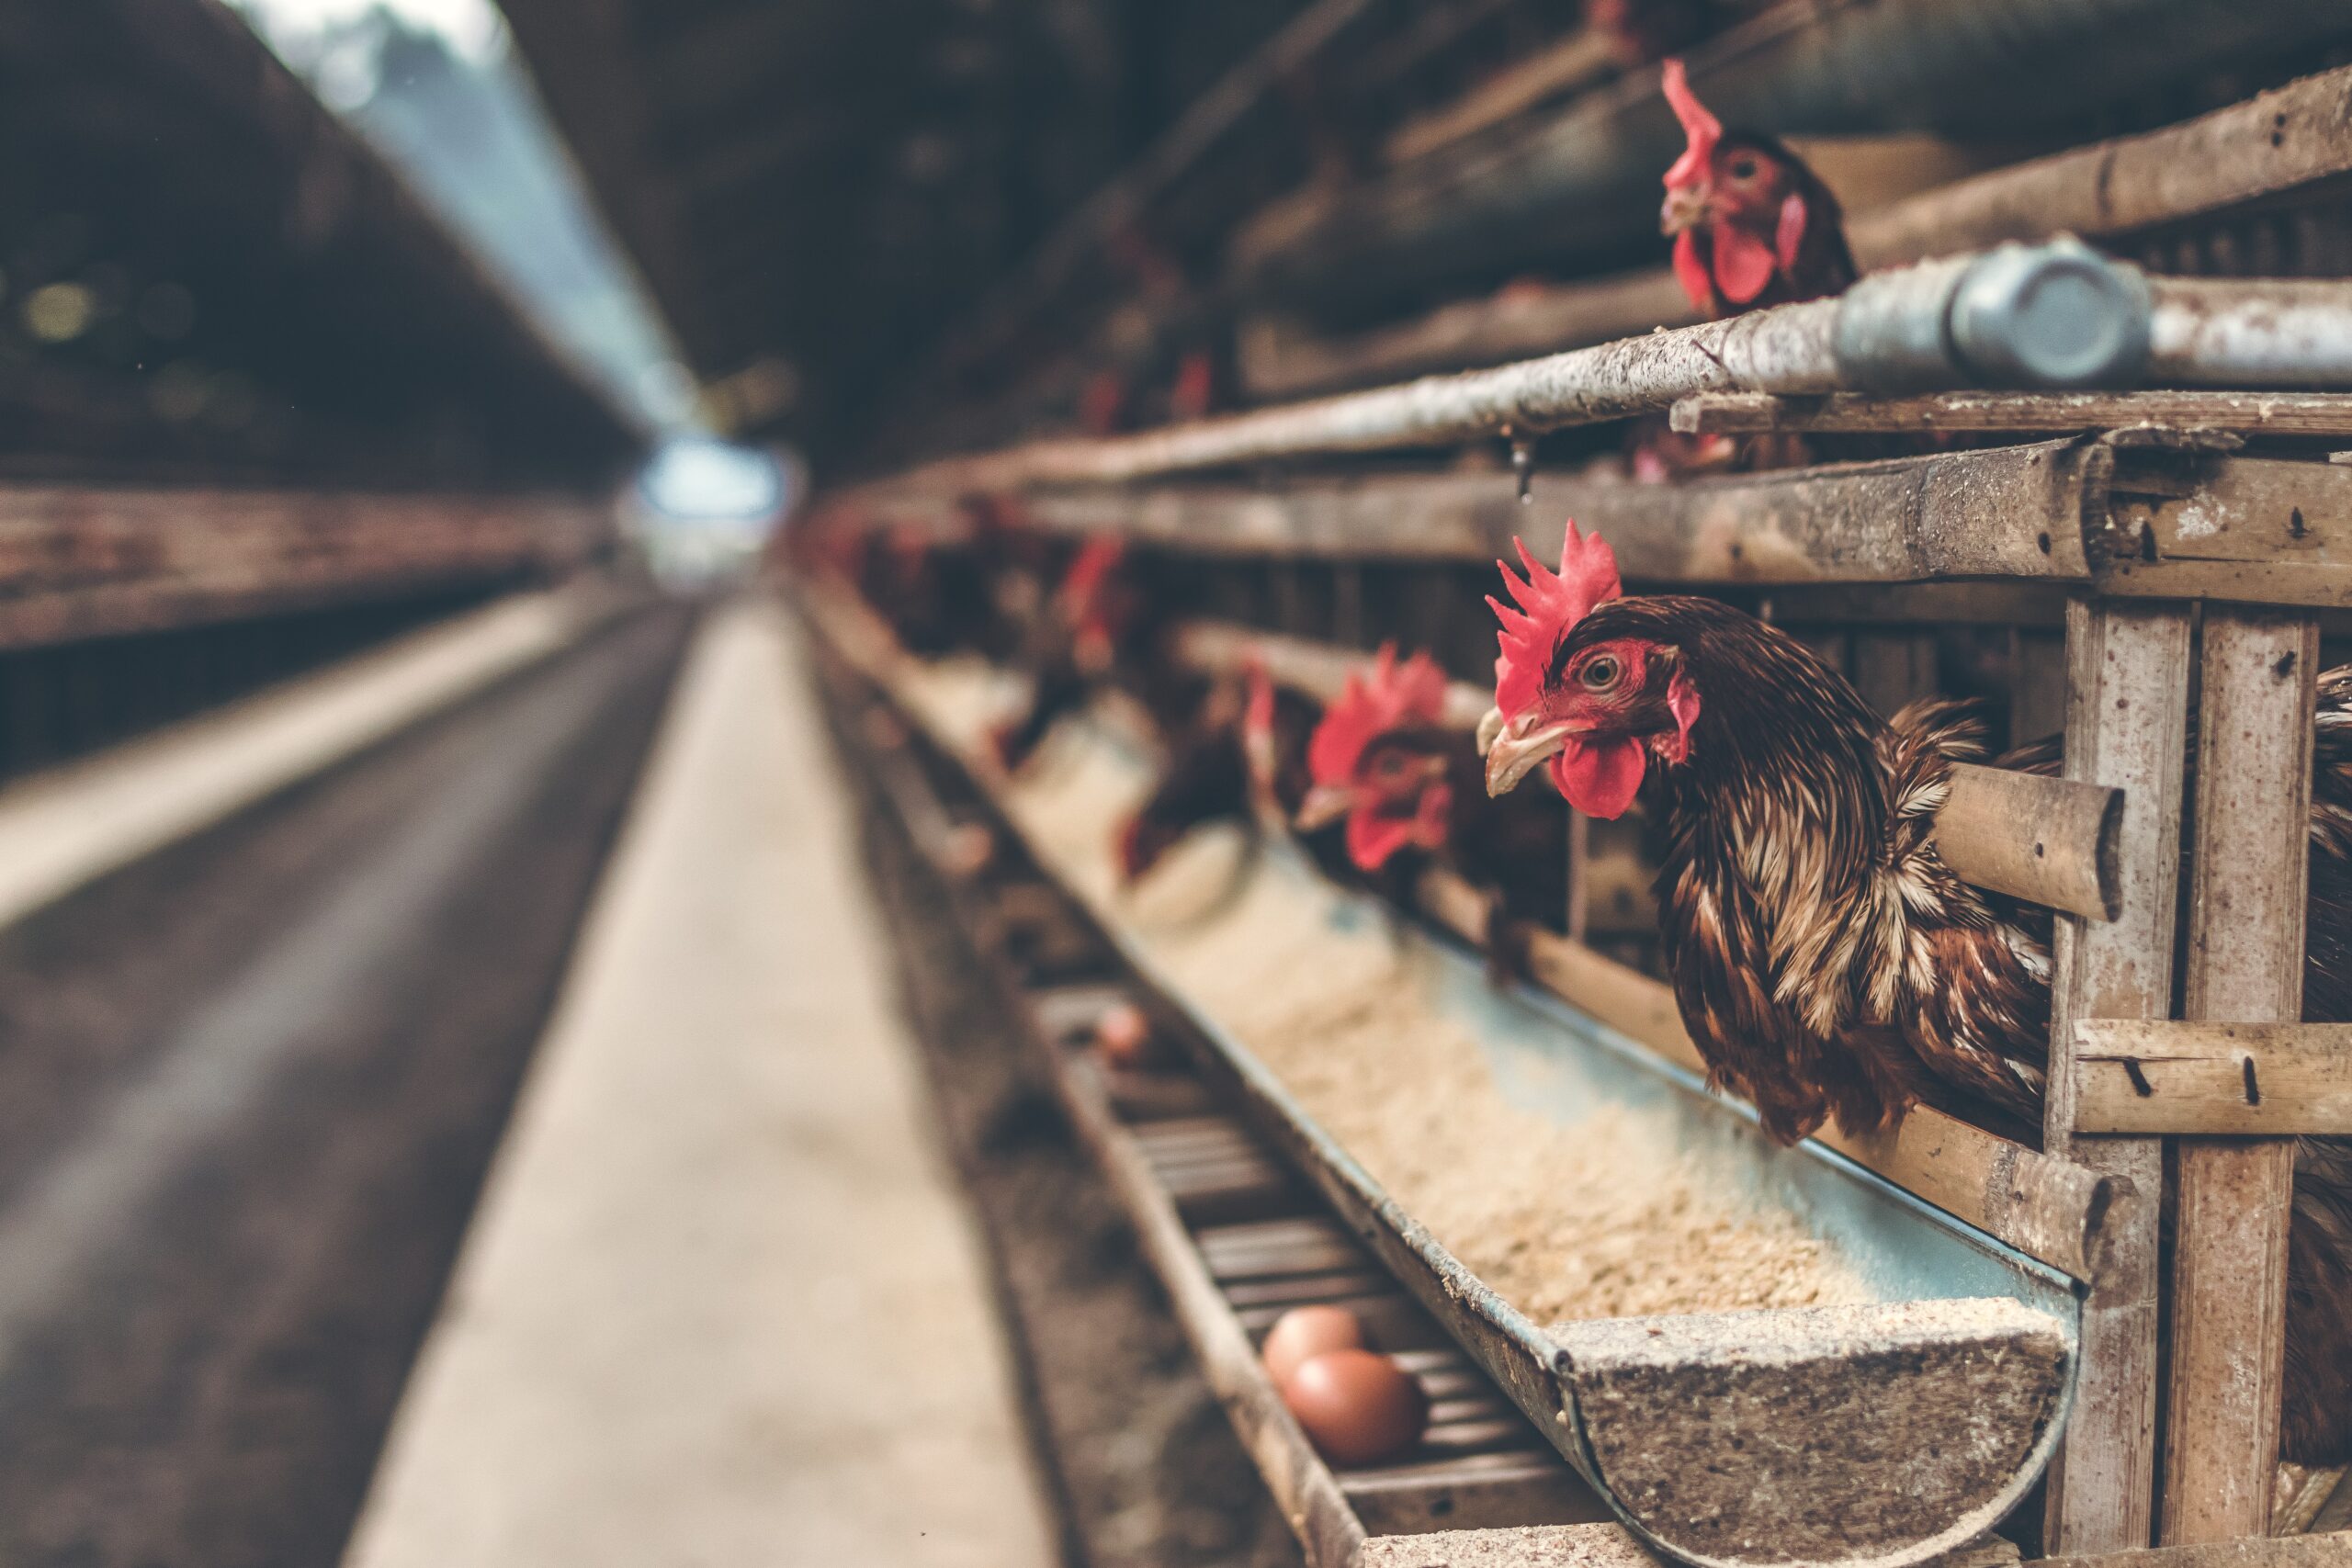 Plant-based packaging could improve poultry sustainability